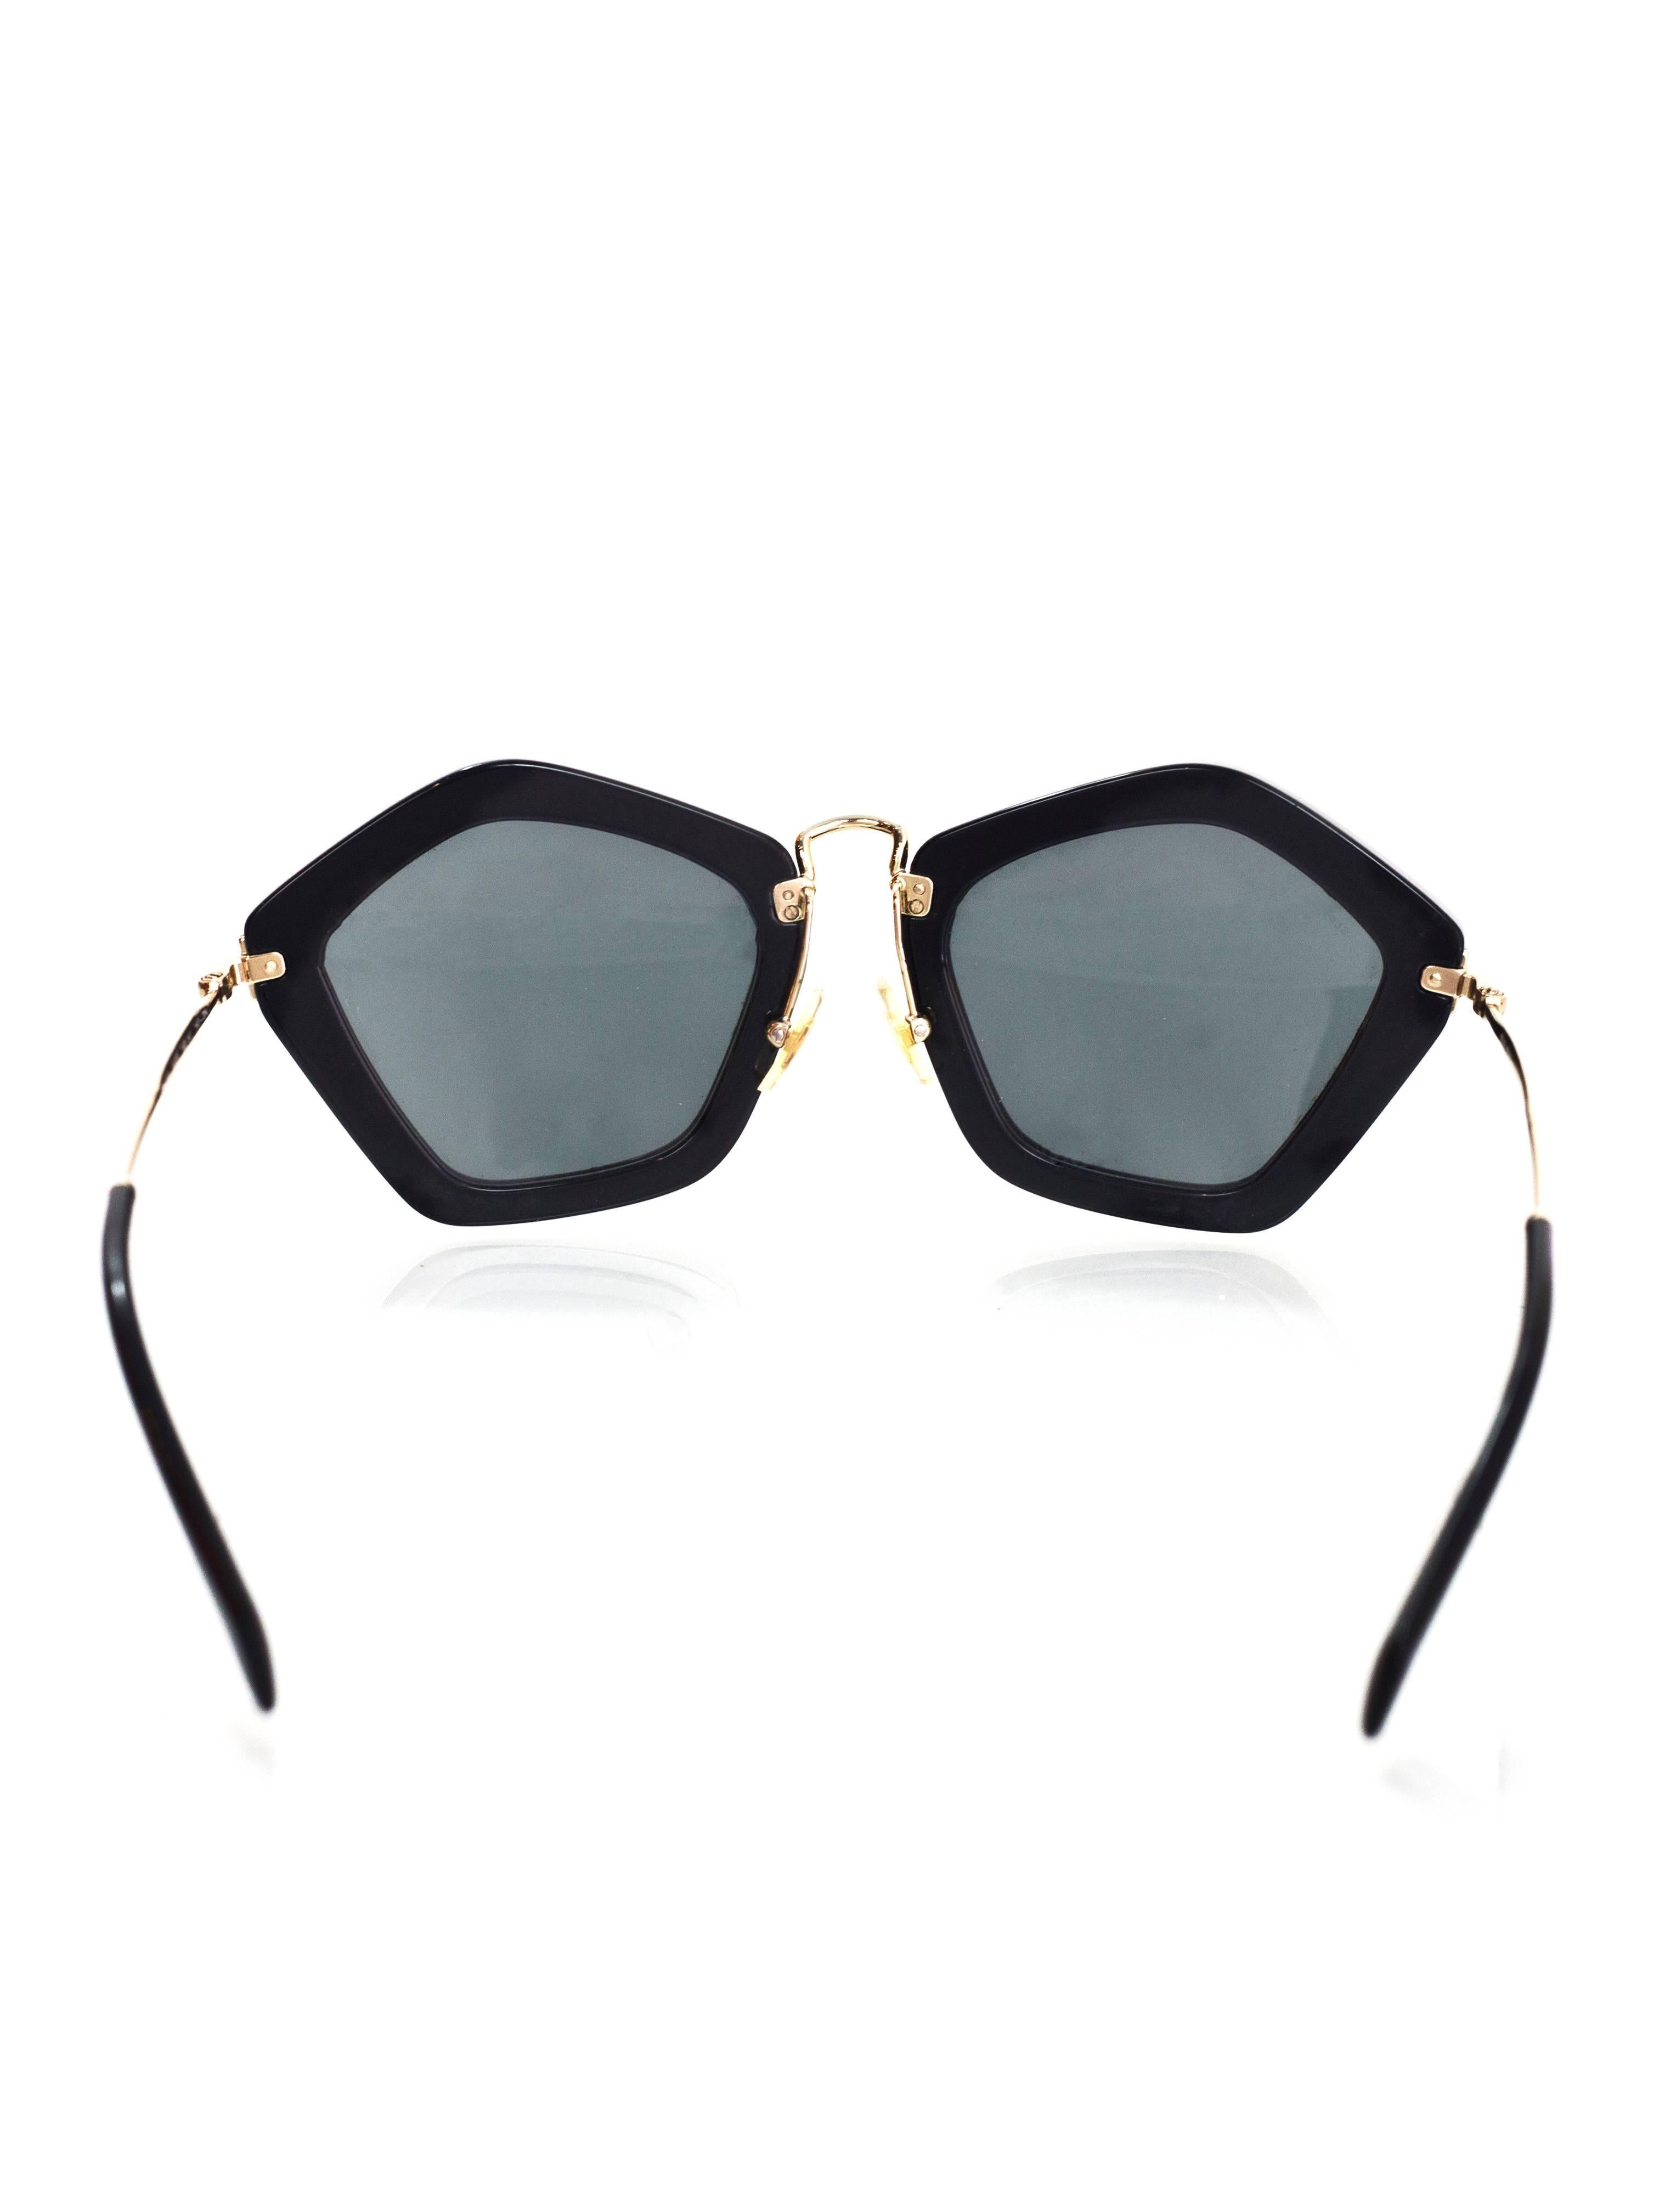 Miu Miu Black and Goldtone Noir Geometric Sunglasses with Case rt. $430 In Excellent Condition In New York, NY